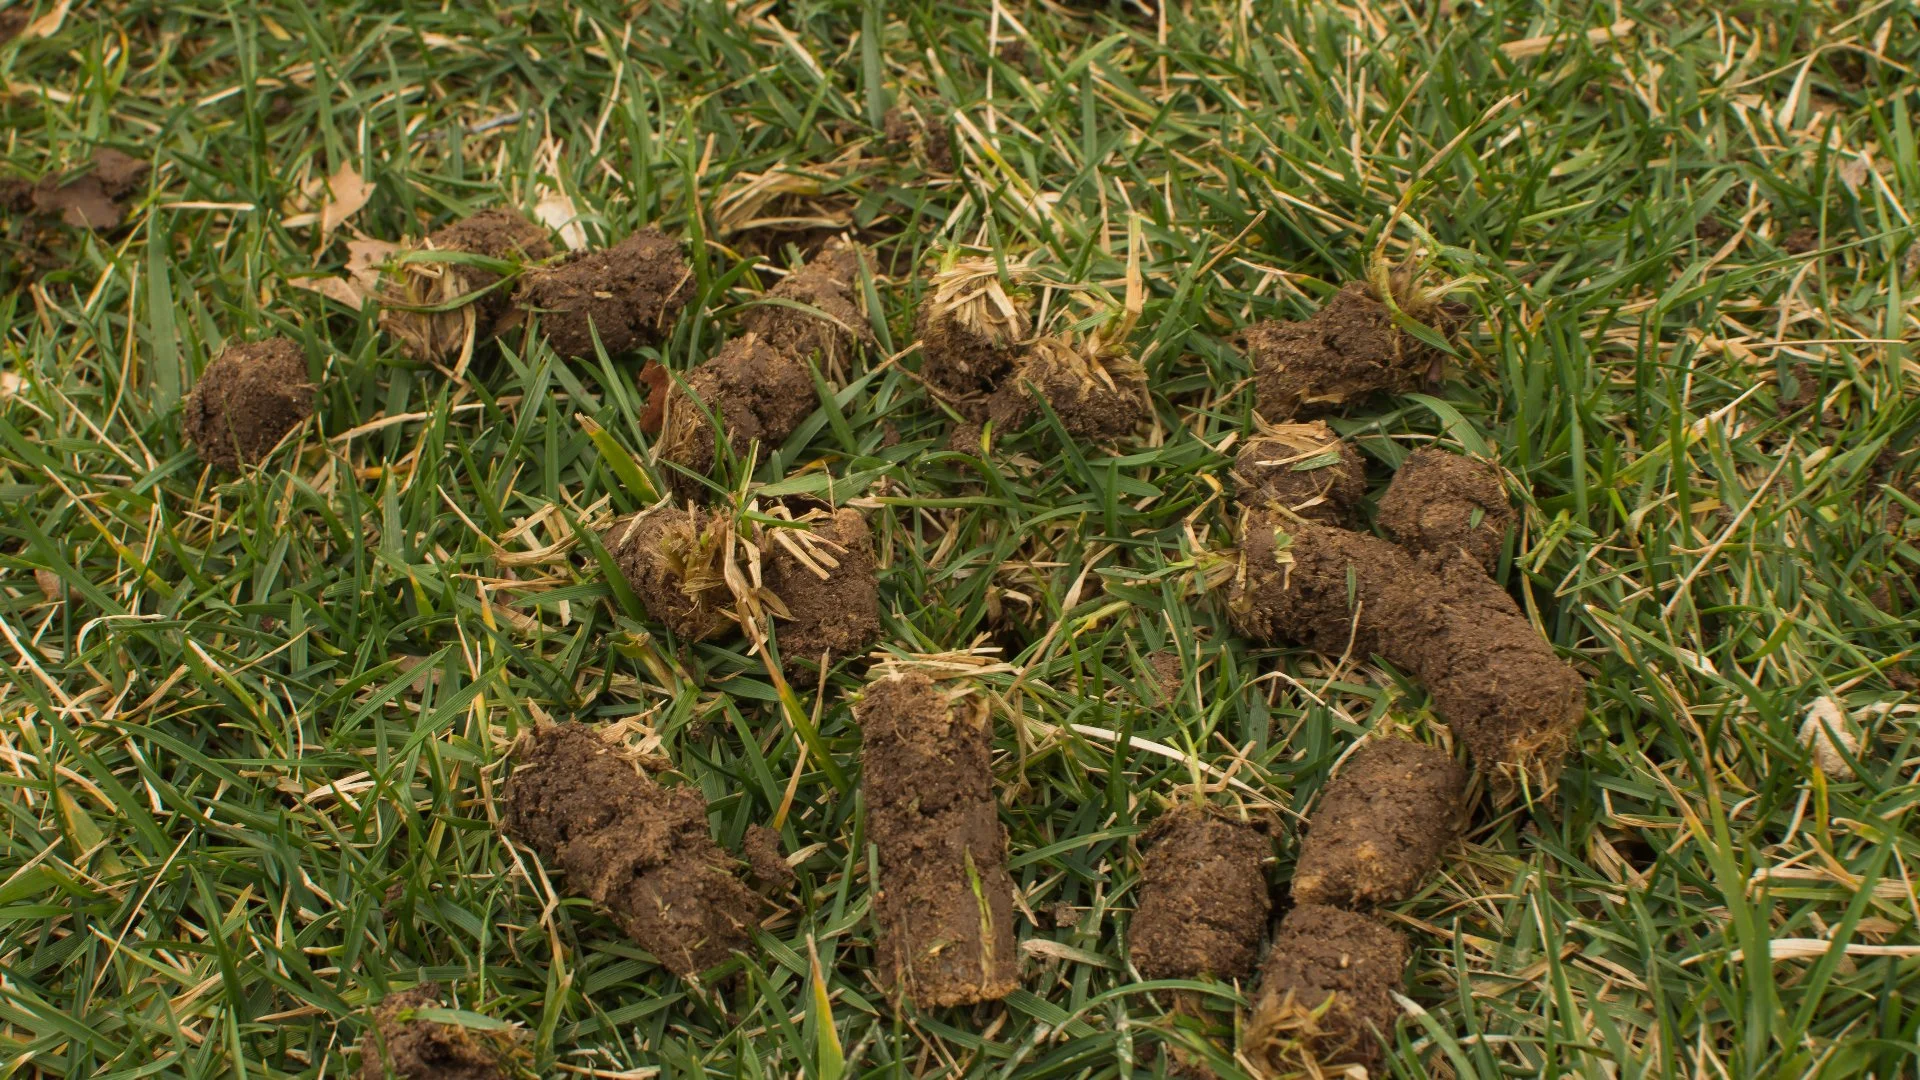 There's Clumps of Soil on My Lawn After Aeration - What Should I Do?